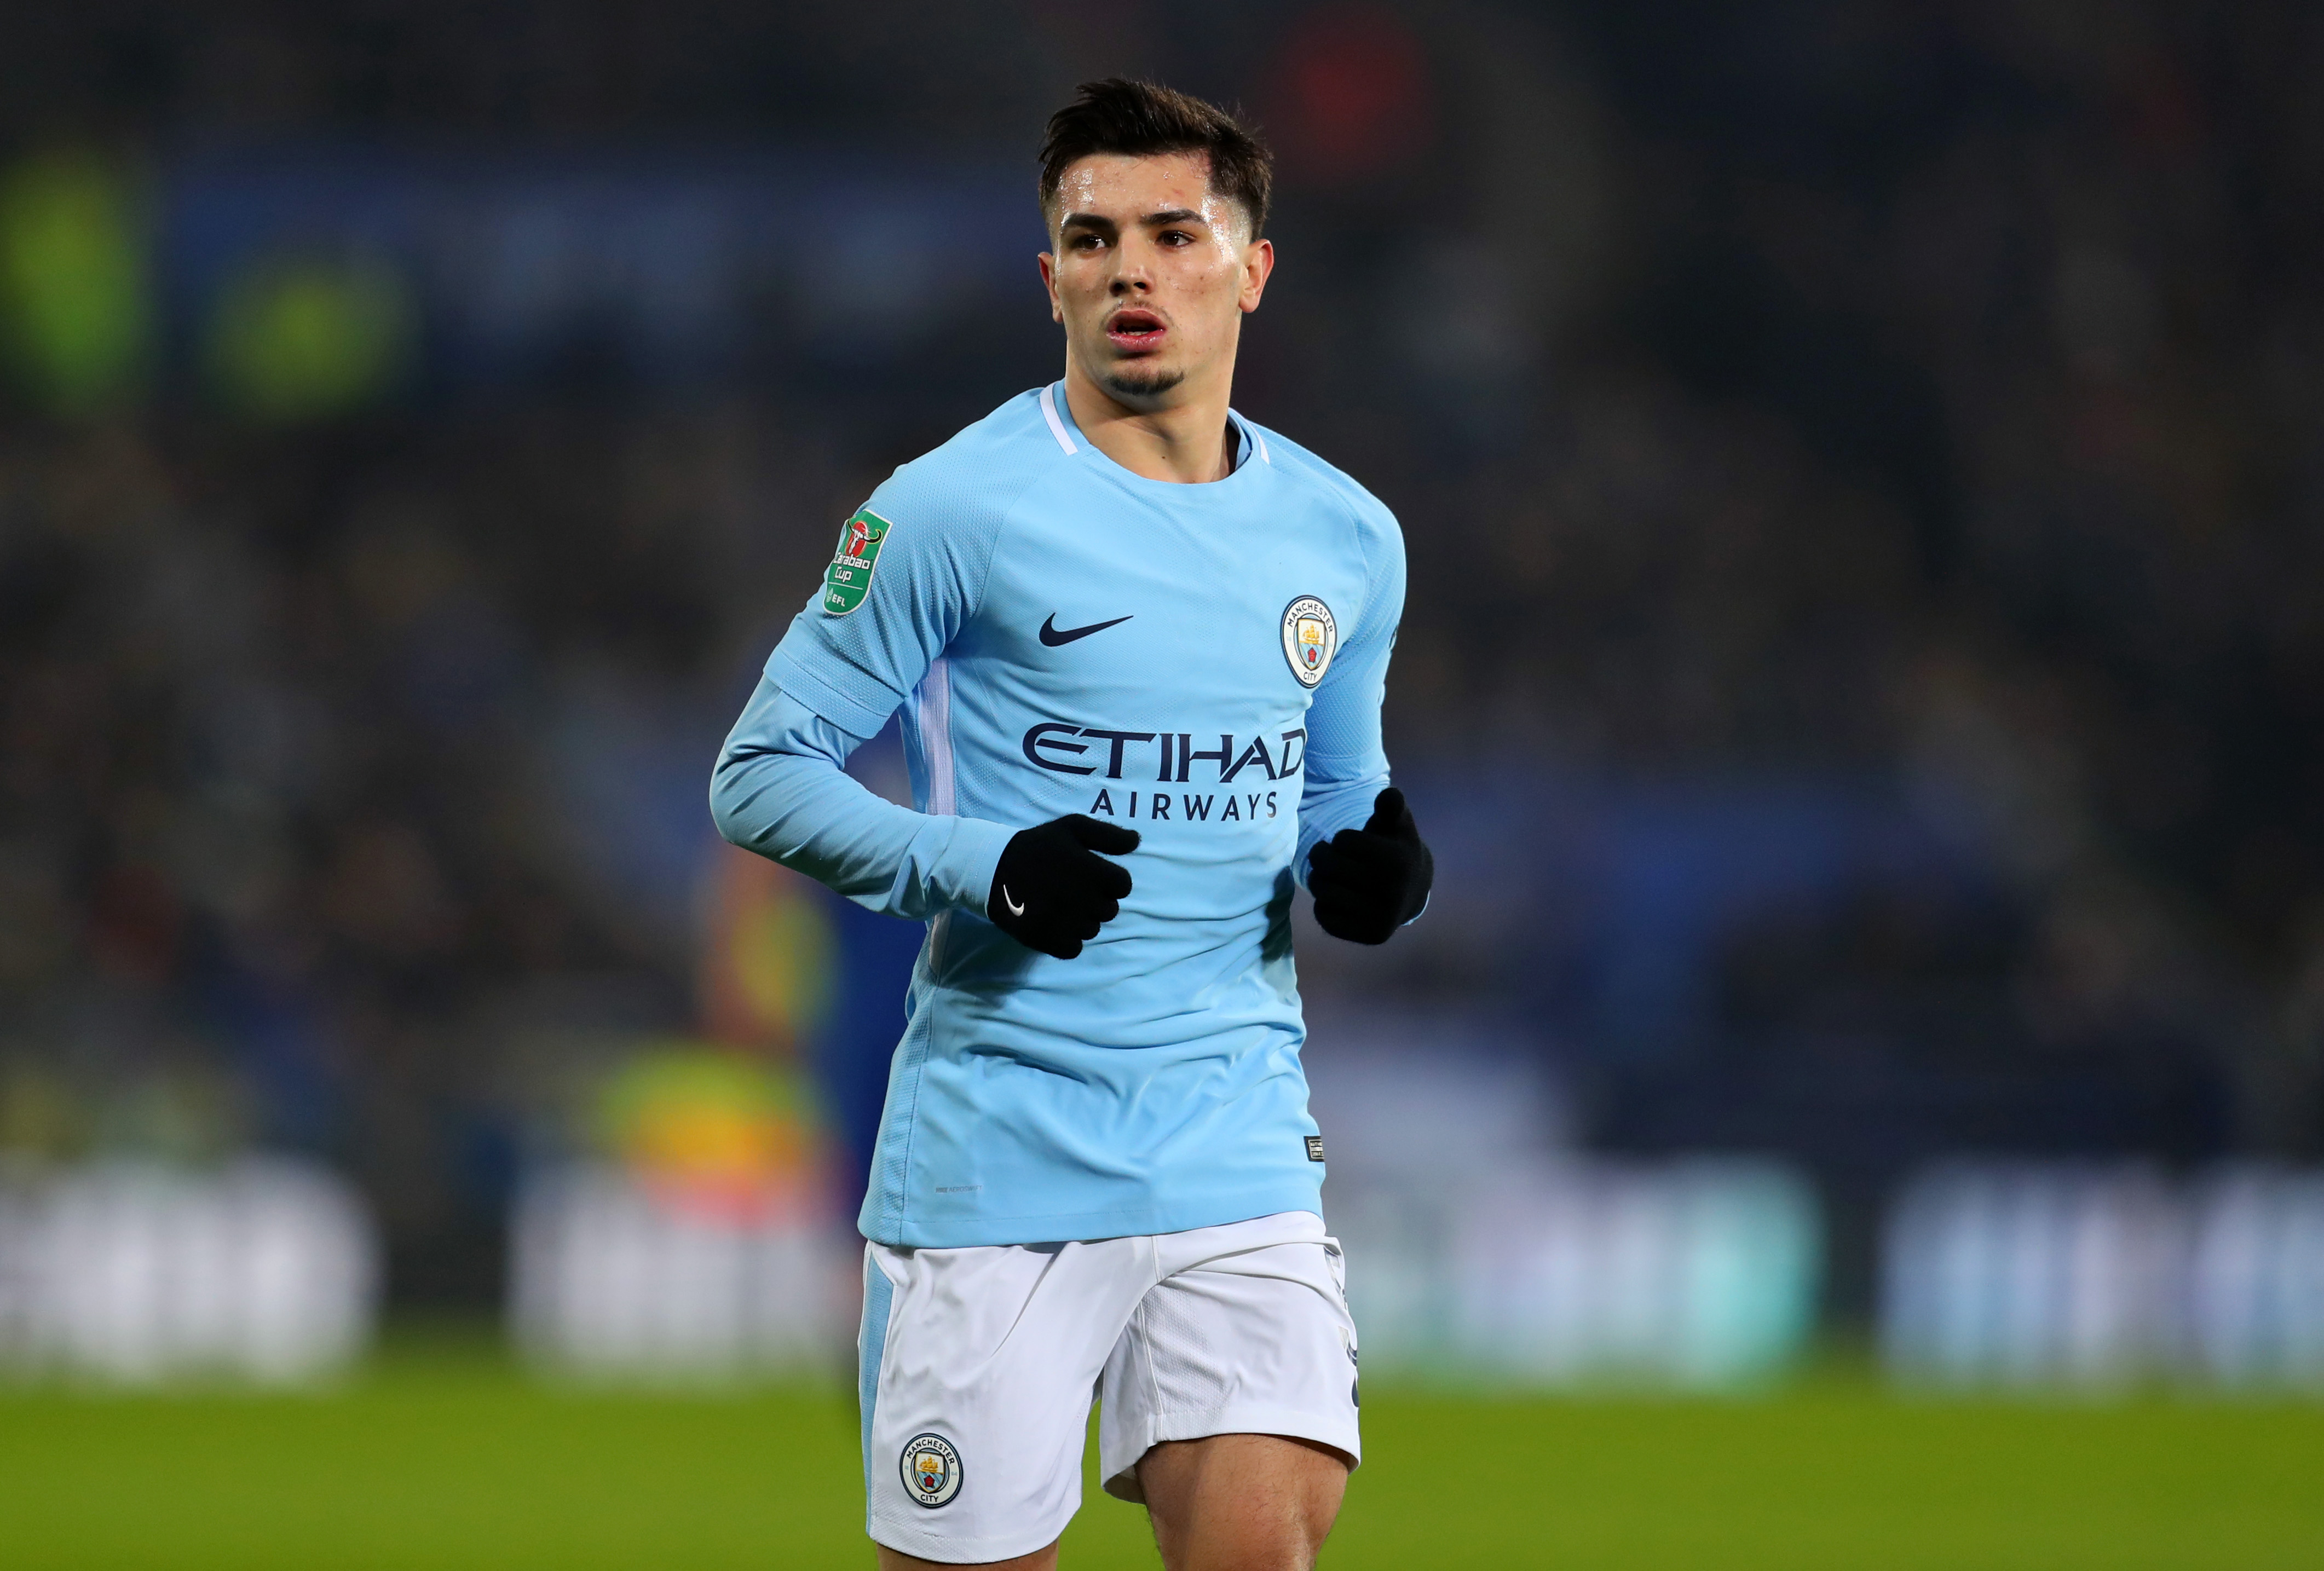 LEICESTER, ENGLAND - DECEMBER 19: Brahim Diaz of Manchester City during the Carabao Cup Quarter-Final match between Leicester City and Manchester City at The King Power Stadium on December 19, 2017 in Leicester, England. (Photo by Catherine Ivill/Getty Images)